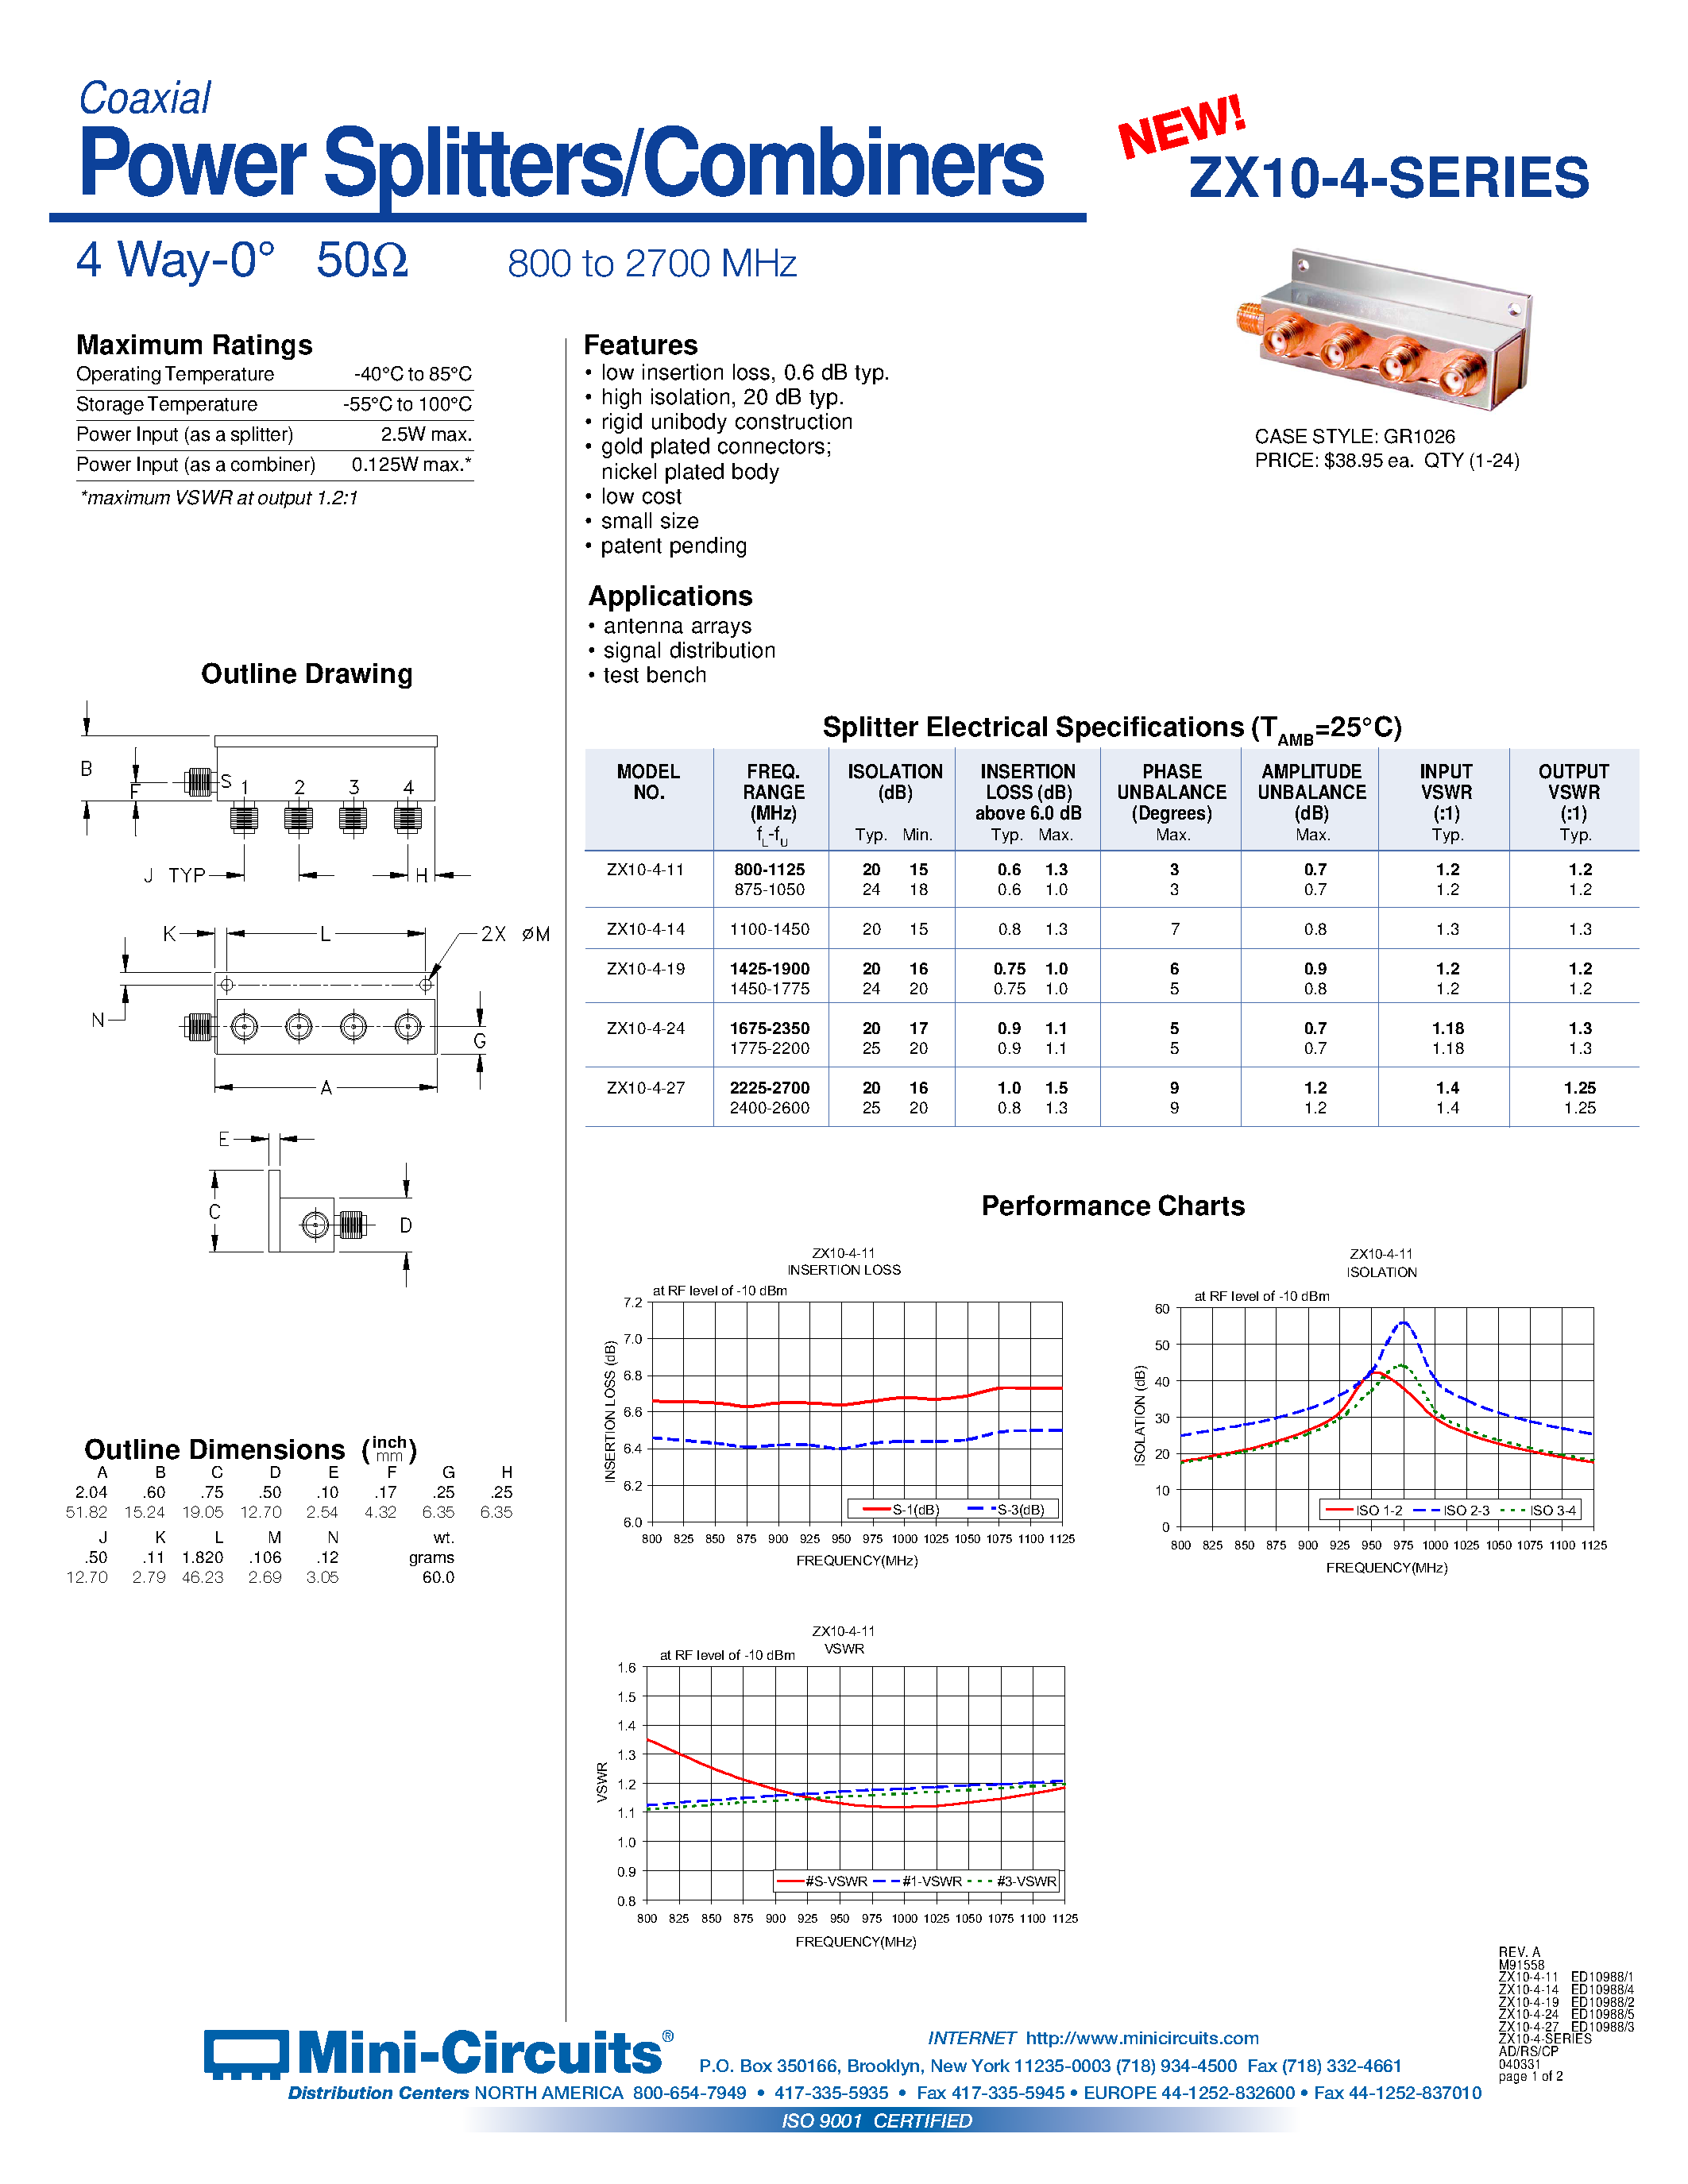 Datasheet ZX10-4-SERIES - Power Splitters/Combiners 4 Way-0 50 800 to 2700 MHz page 1